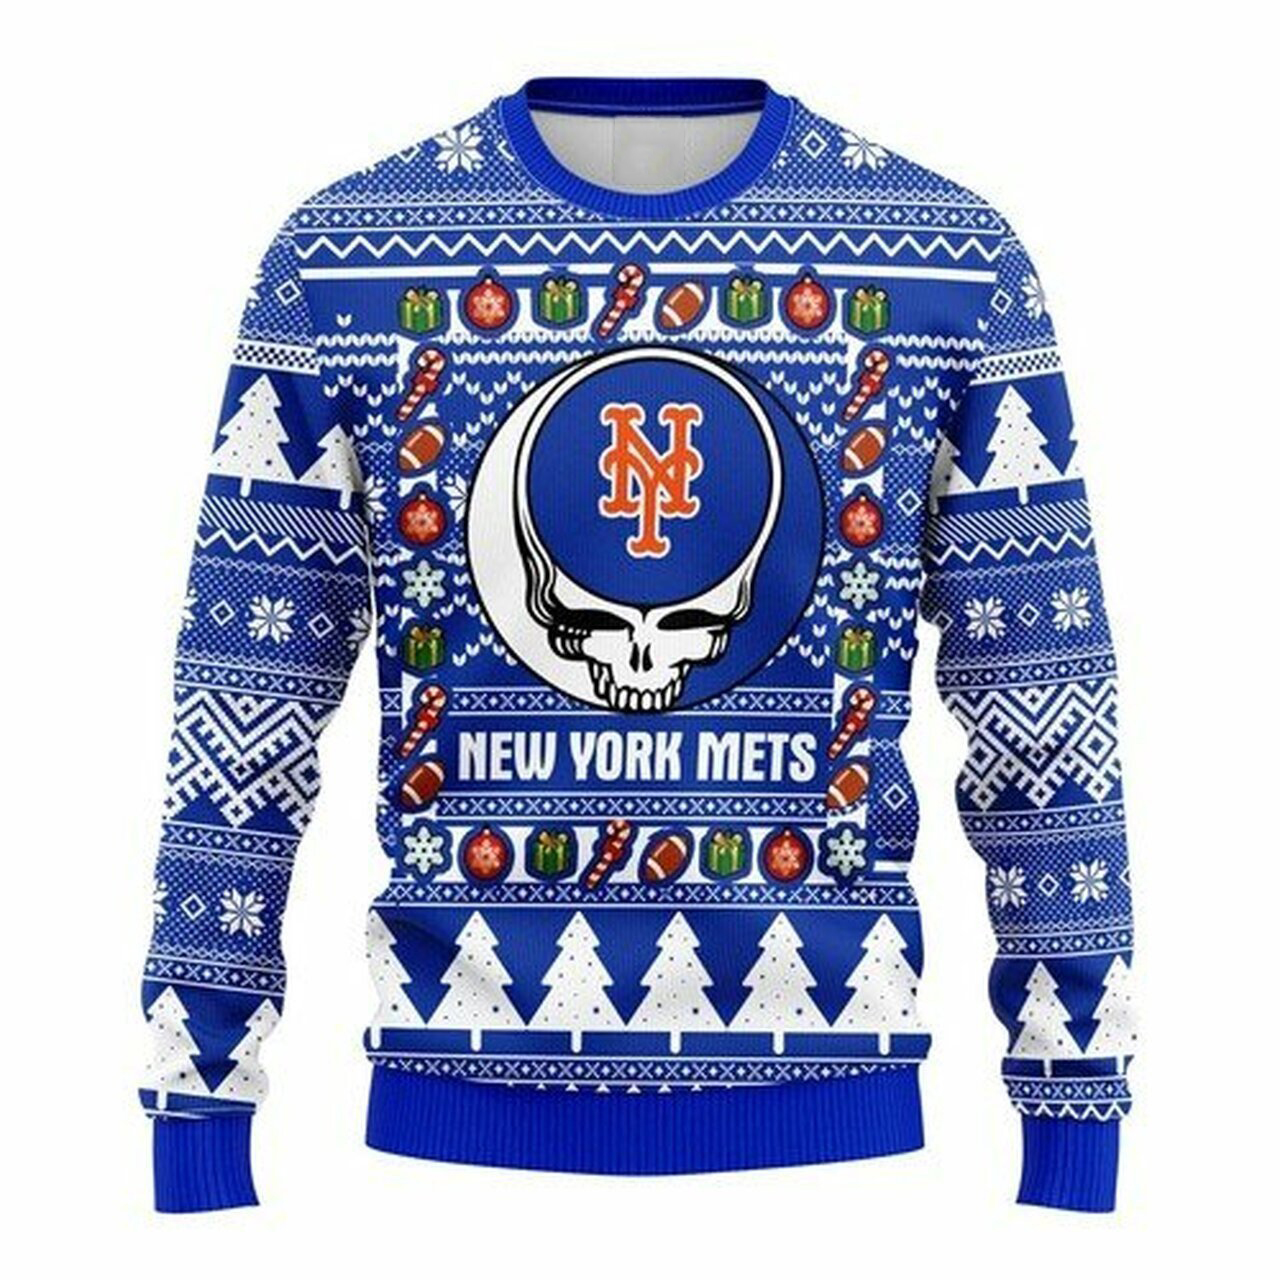 MLB New York Mets Grateful Dead ugly christmas sweater